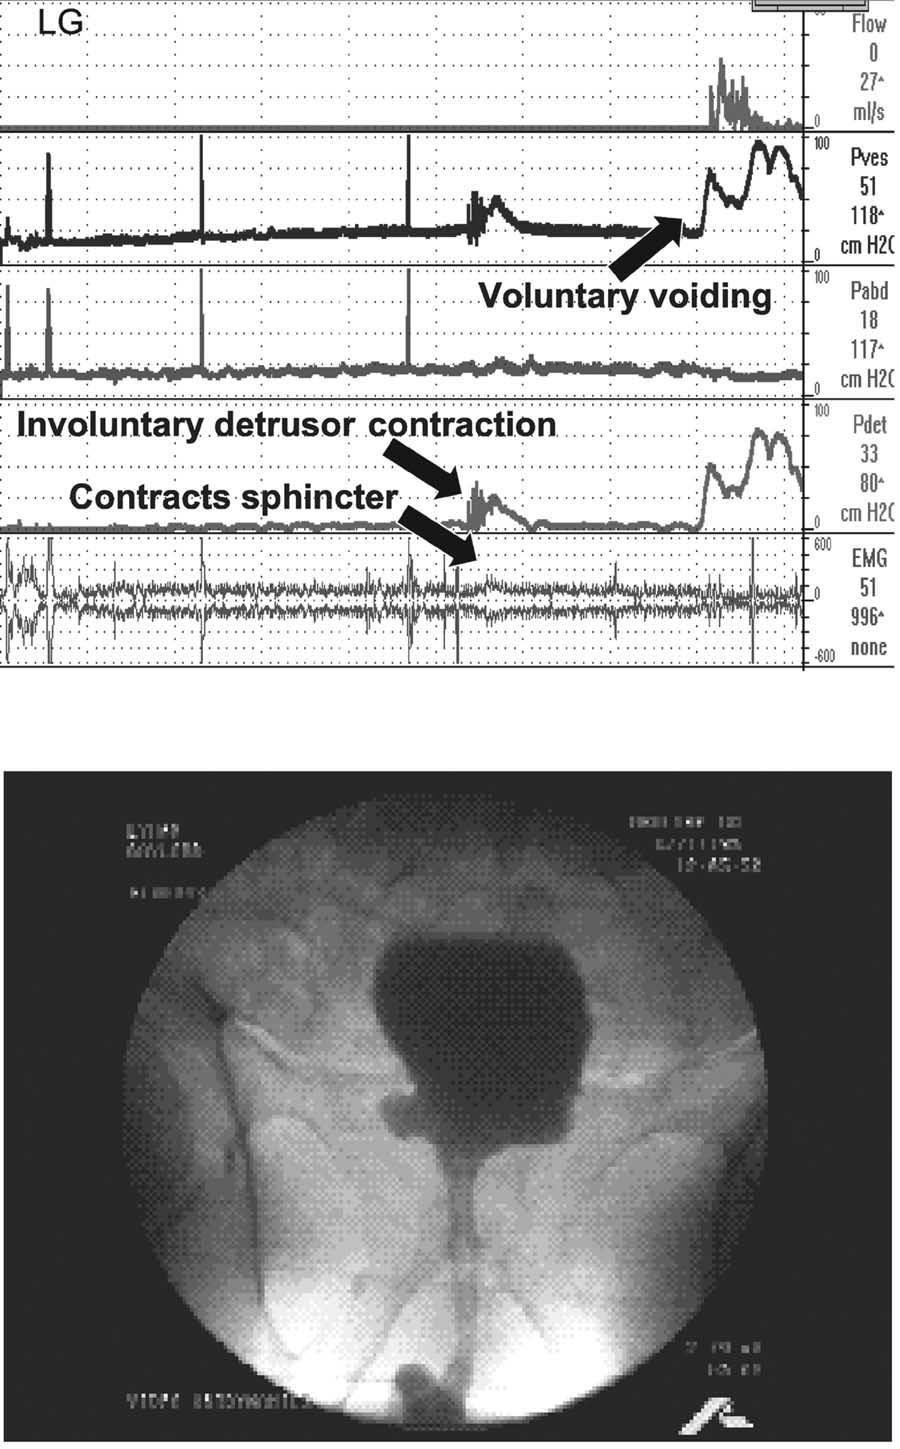 FIGURE 3. Involuntary detrusor contractions and normal control in a man with benign prostatic hyperplasia and prostate cancer without urethral obstruction.